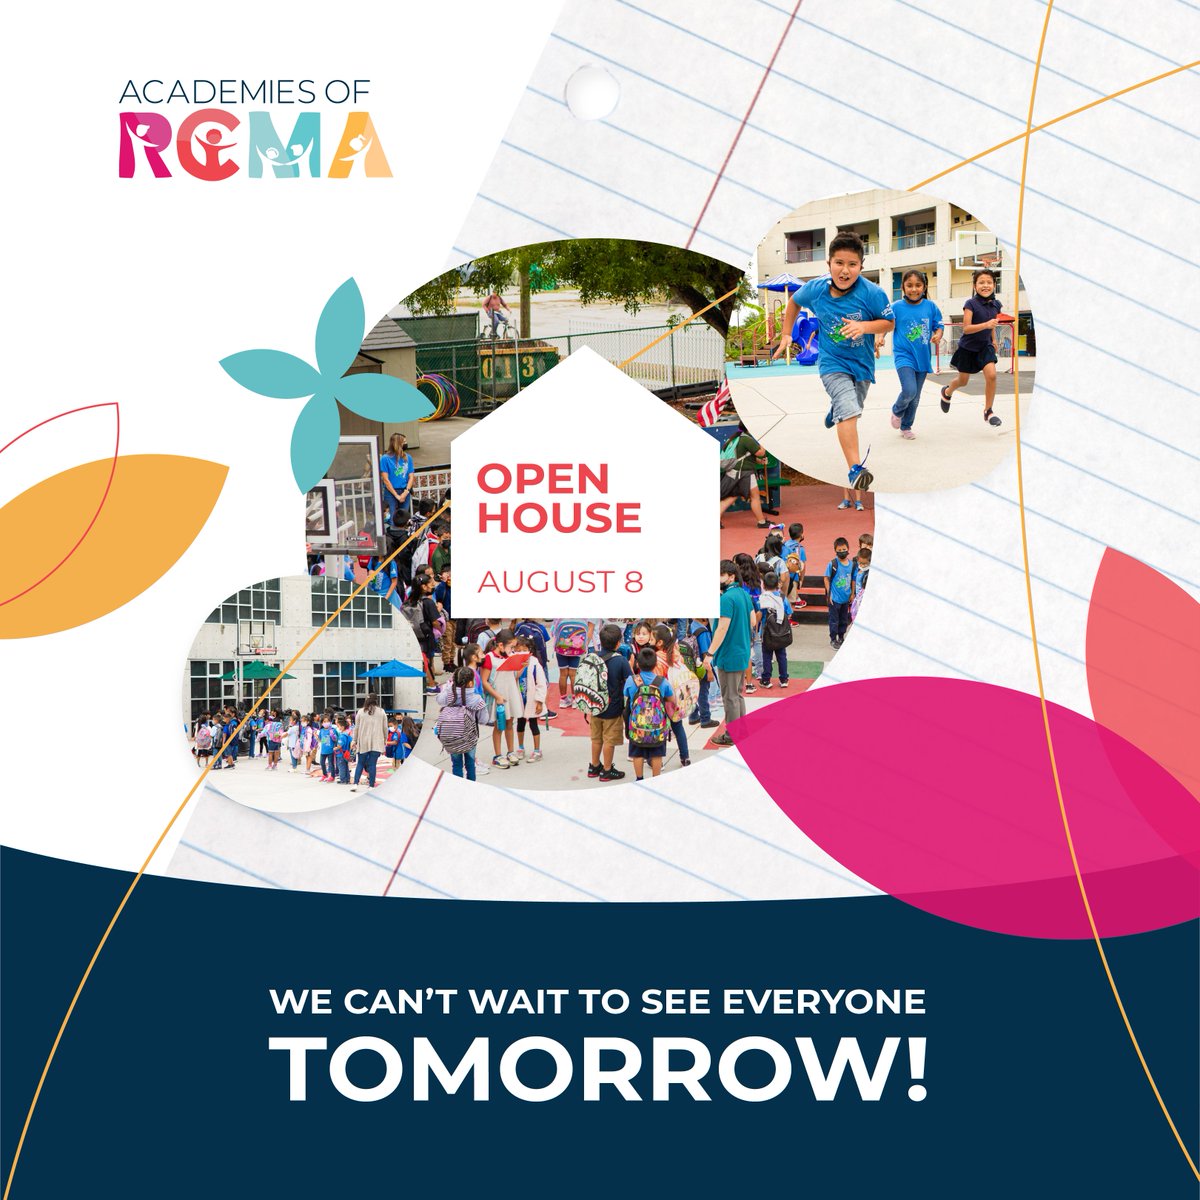 Join us for Open House tomorrow at all of our RCMA campuses. We look forward to kicking off the new school year - see you there!

#charterschool #nonprofit #teachers #florida #floridaeducation #backtoschool #education #openhouse #mulberry #immokalee #wimauma